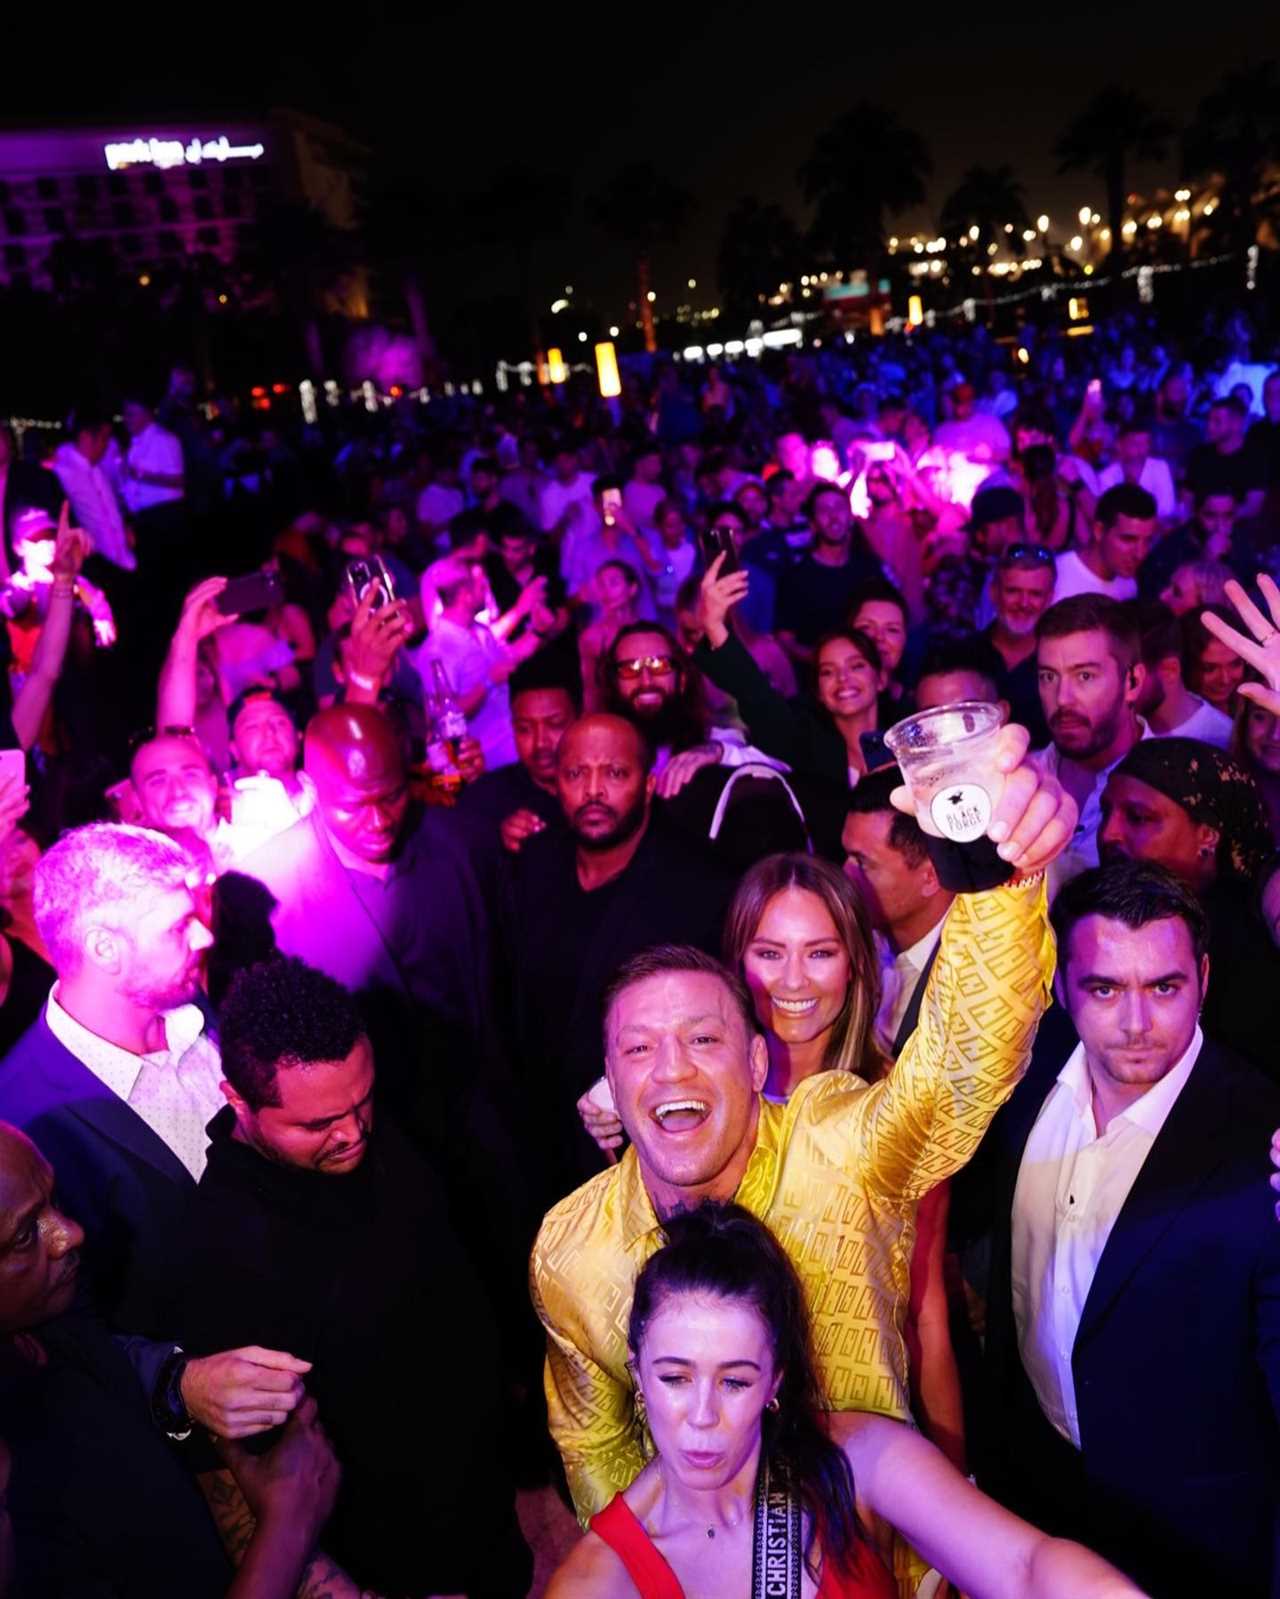 Conor McGregor's return to the UFC is attracting the same reaction from his fans as they party in Abu Dhabi.